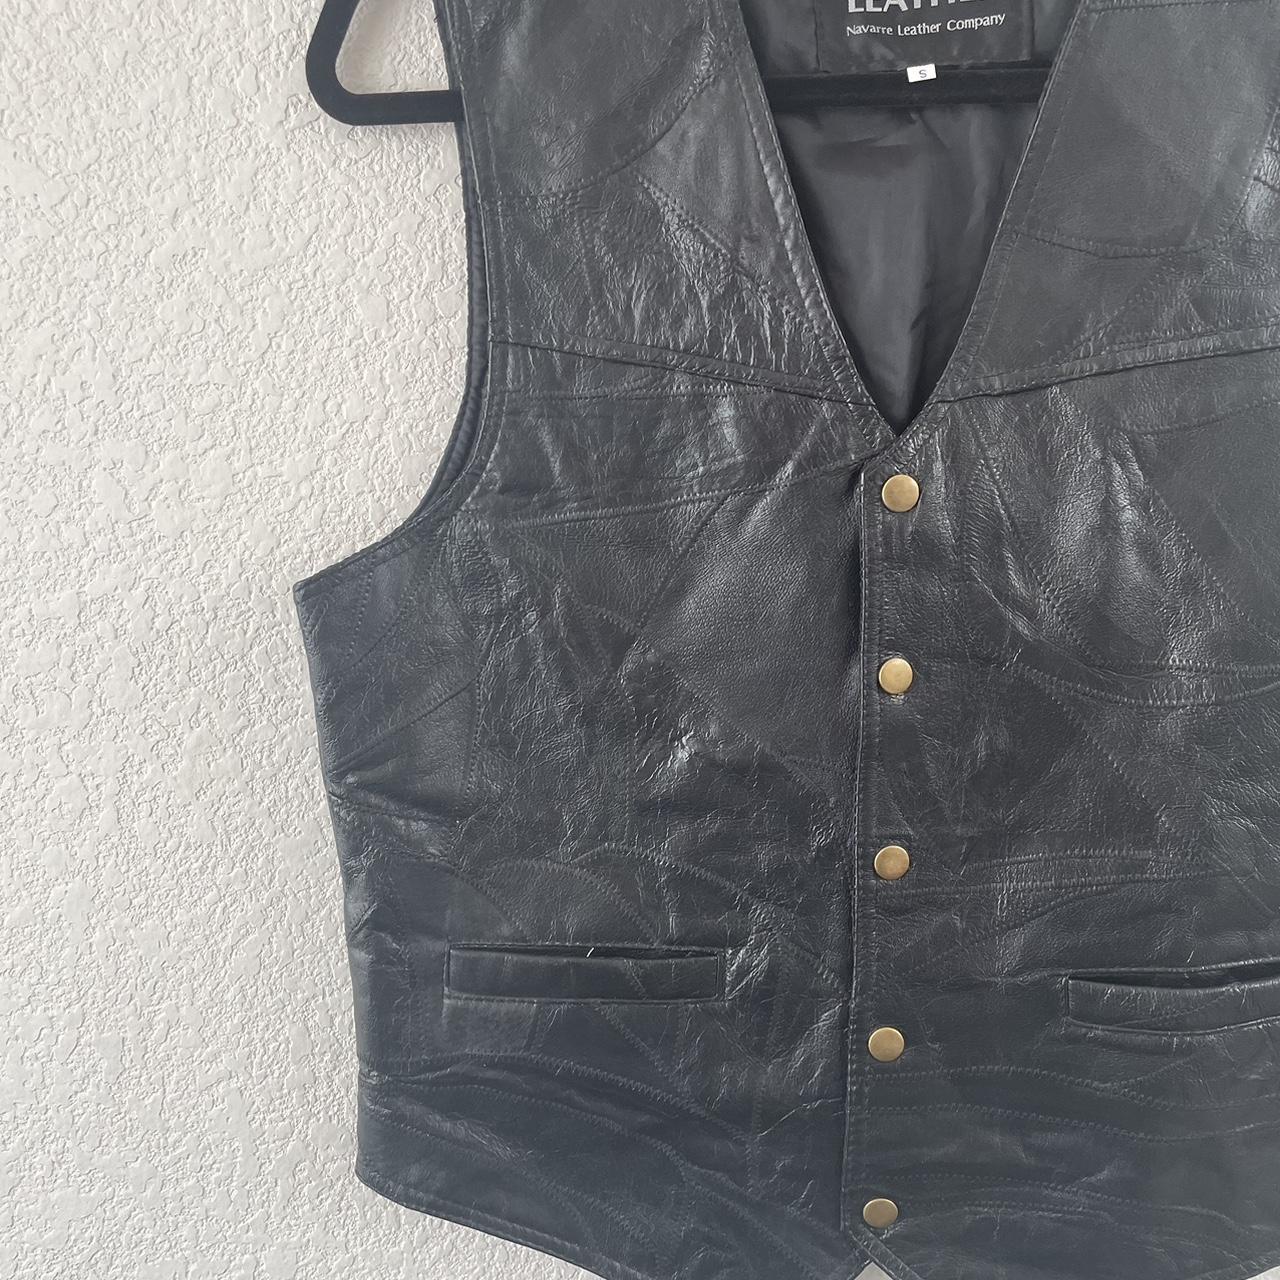 Wilson’s Leather Men's Black and Gold Gilet (2)